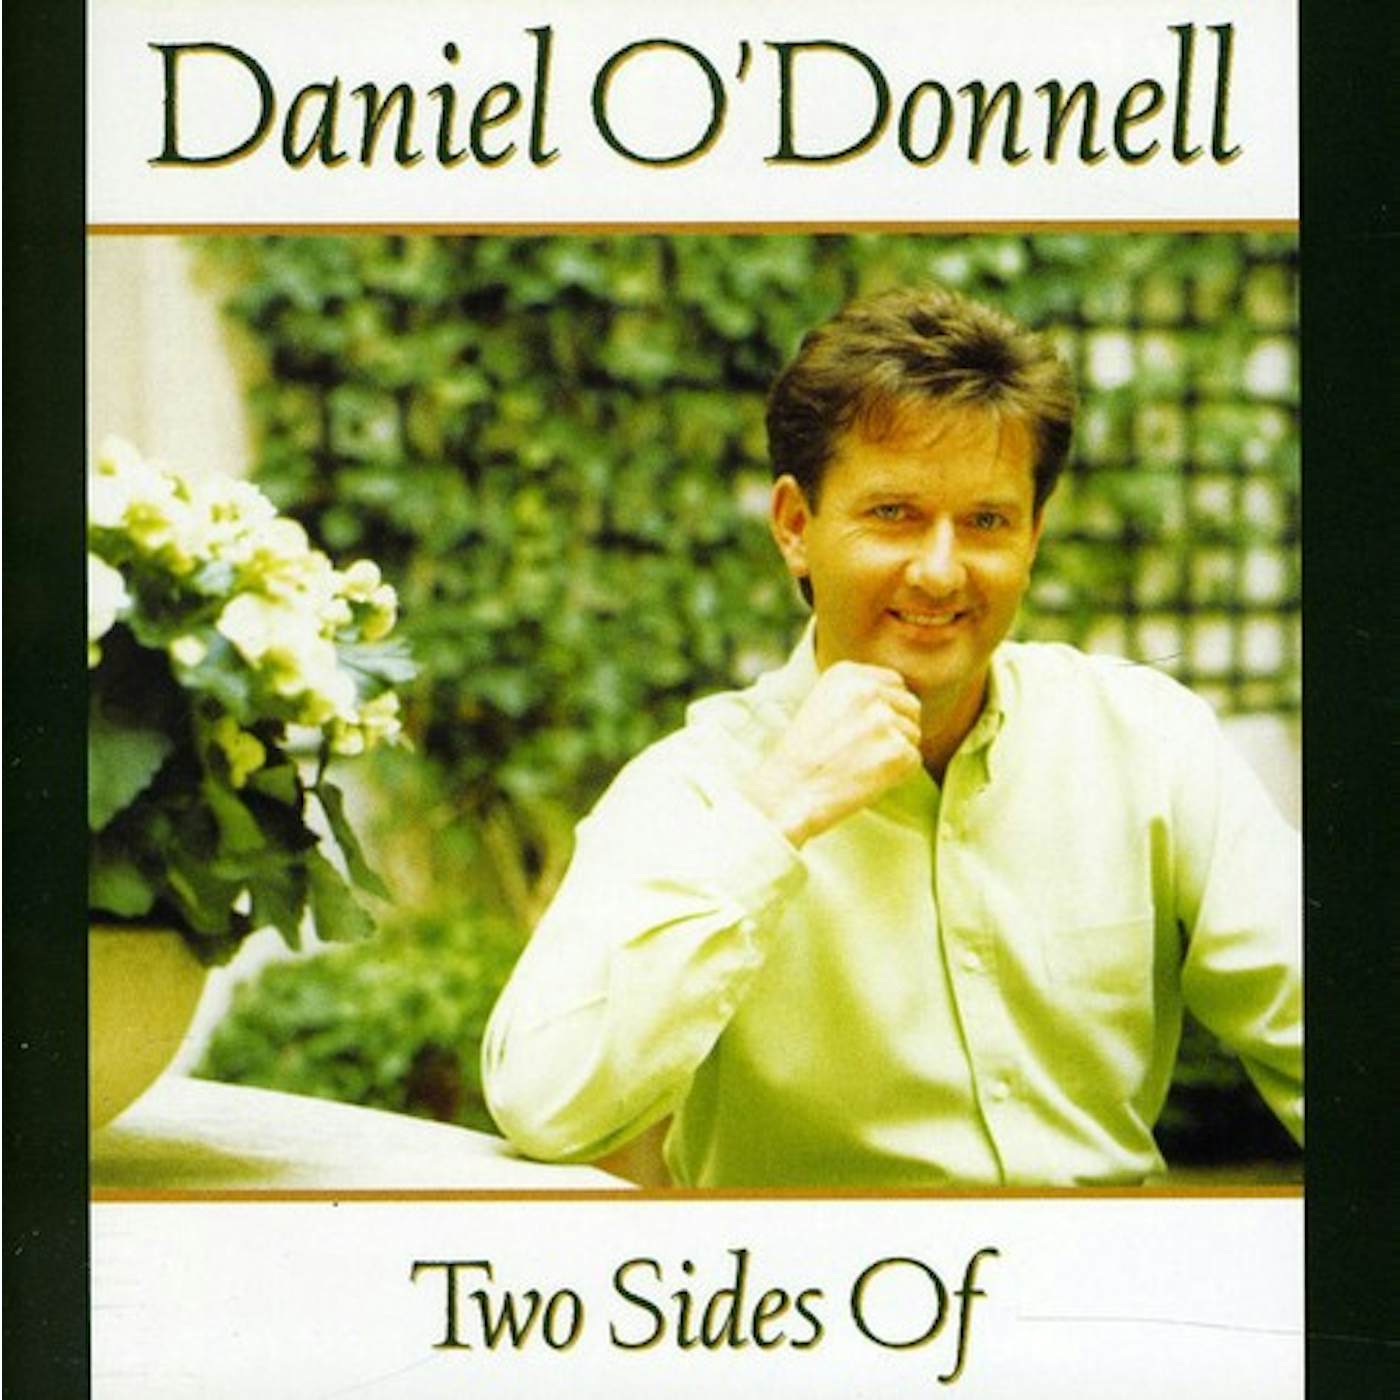 Daniel O'Donnell TWO SIDES OF CD